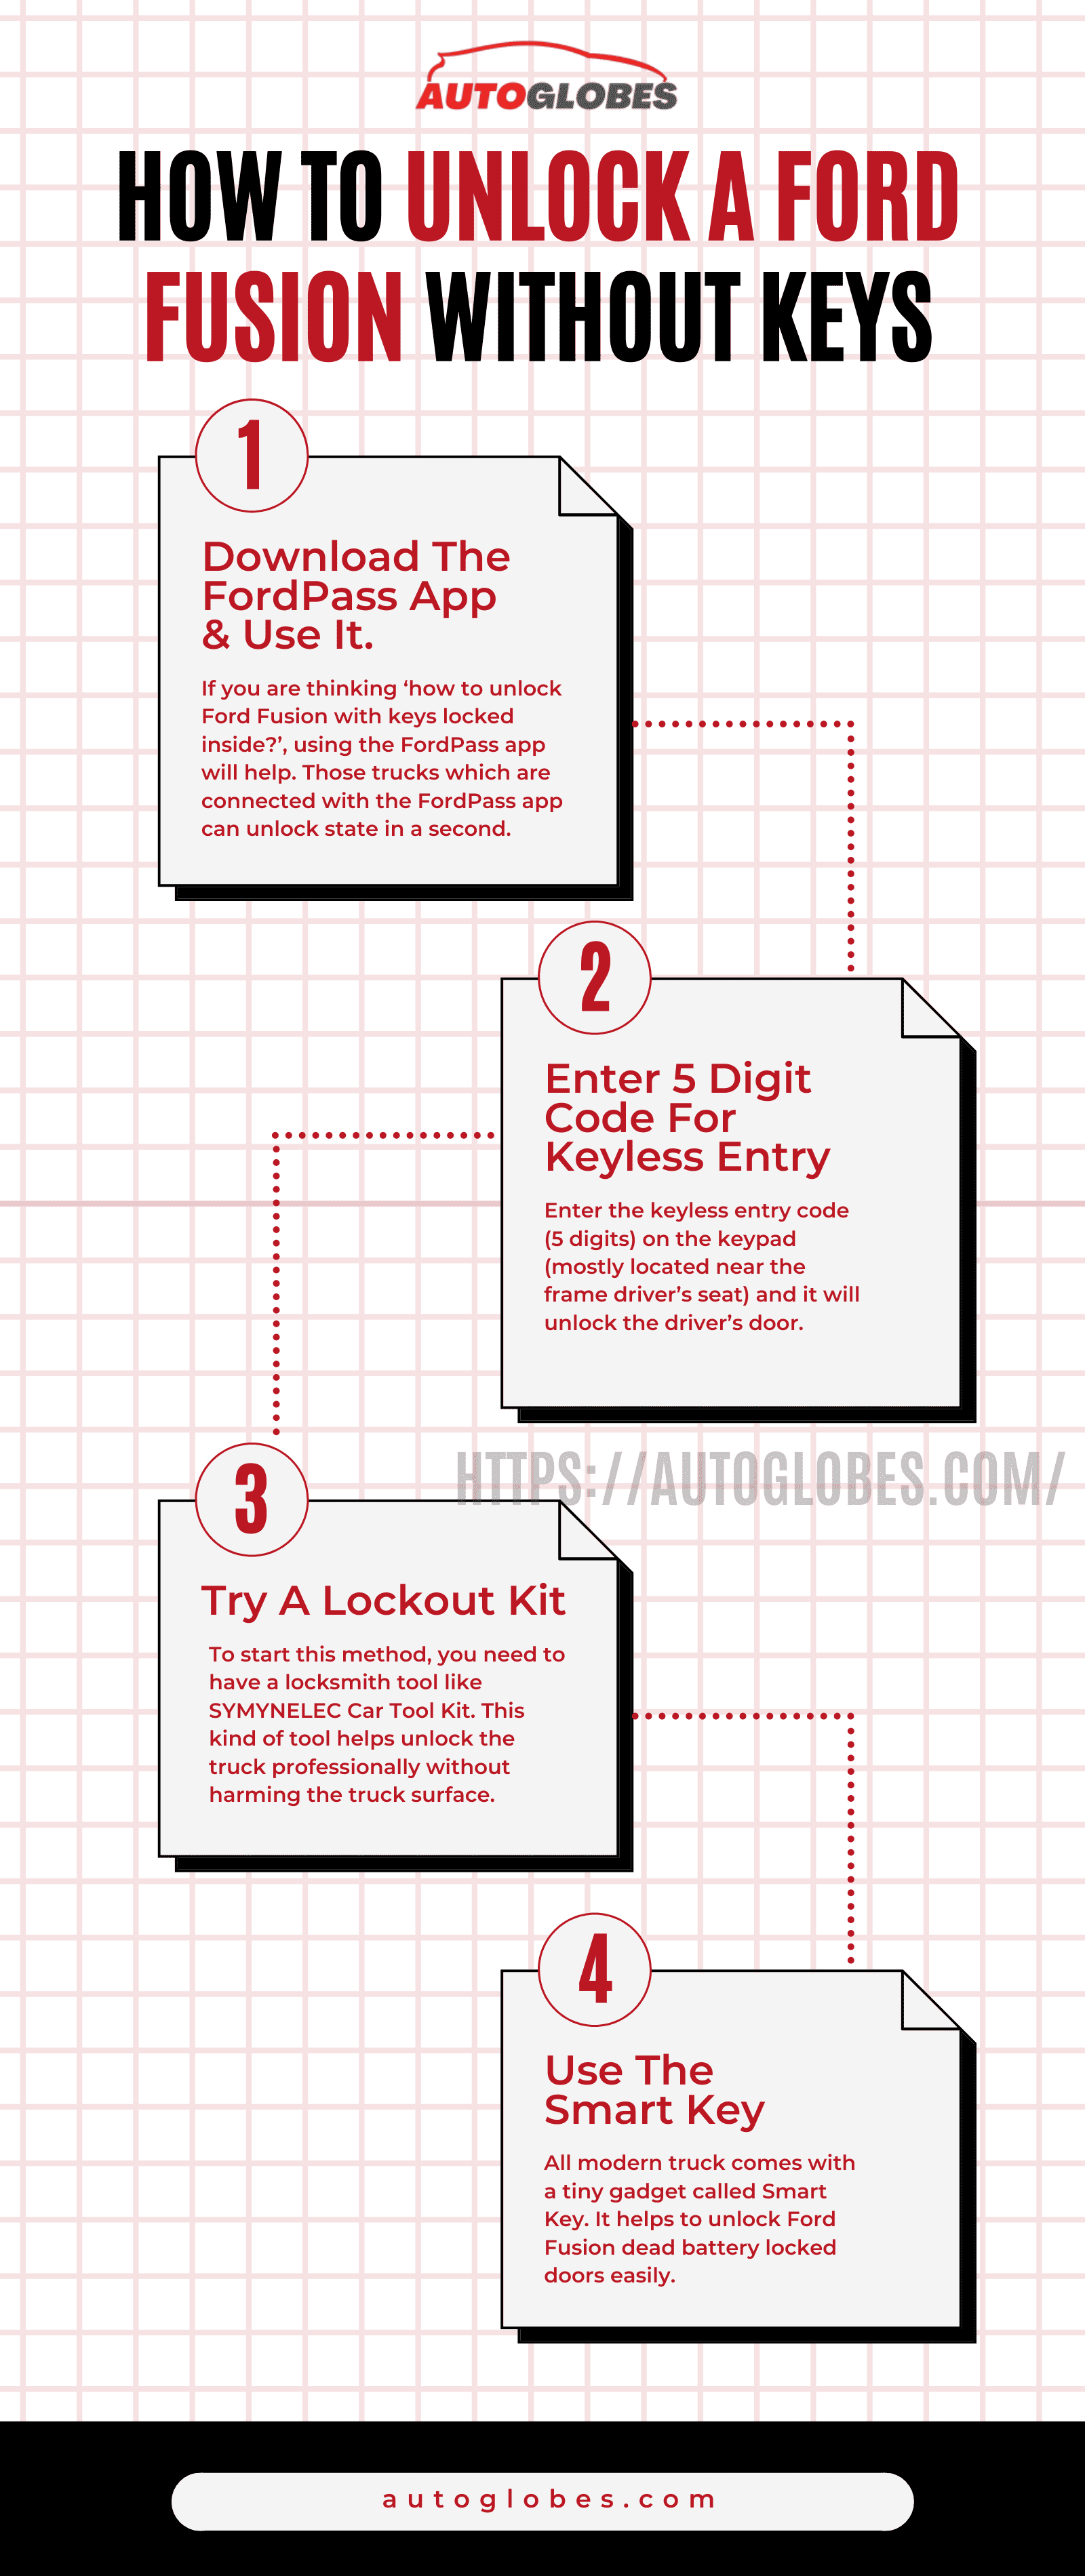 Steps To Unlock A Ford Fusion Without Keys infographic